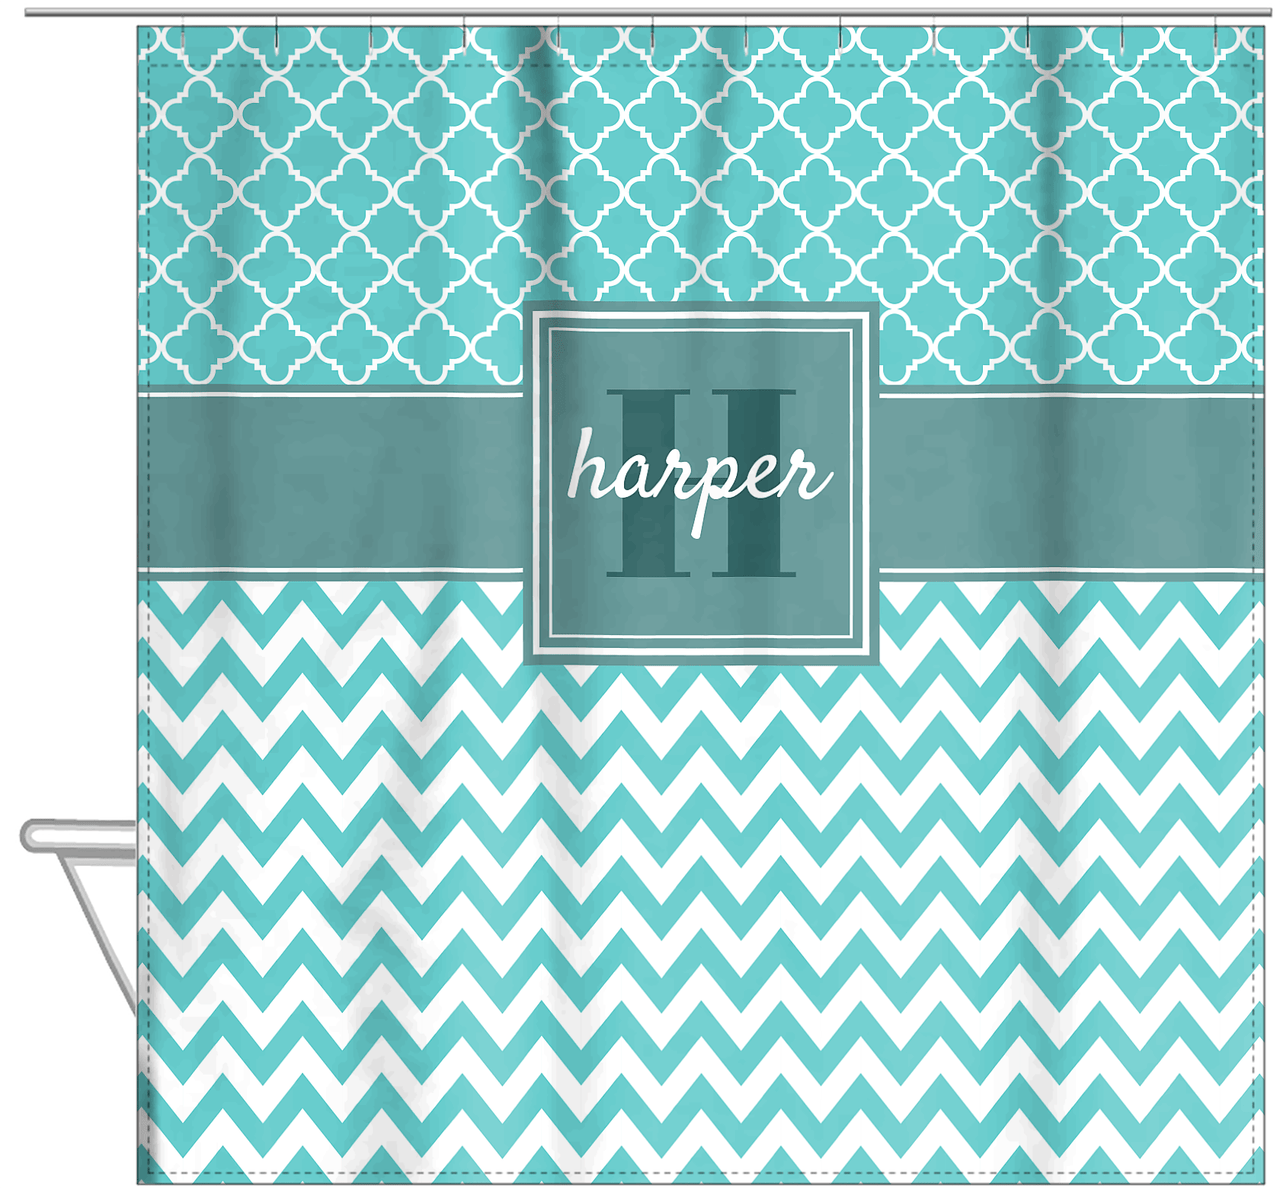 Personalized Quatrefoil and Chevron I Shower Curtain - Teal and White - Square Nameplate - Hanging View